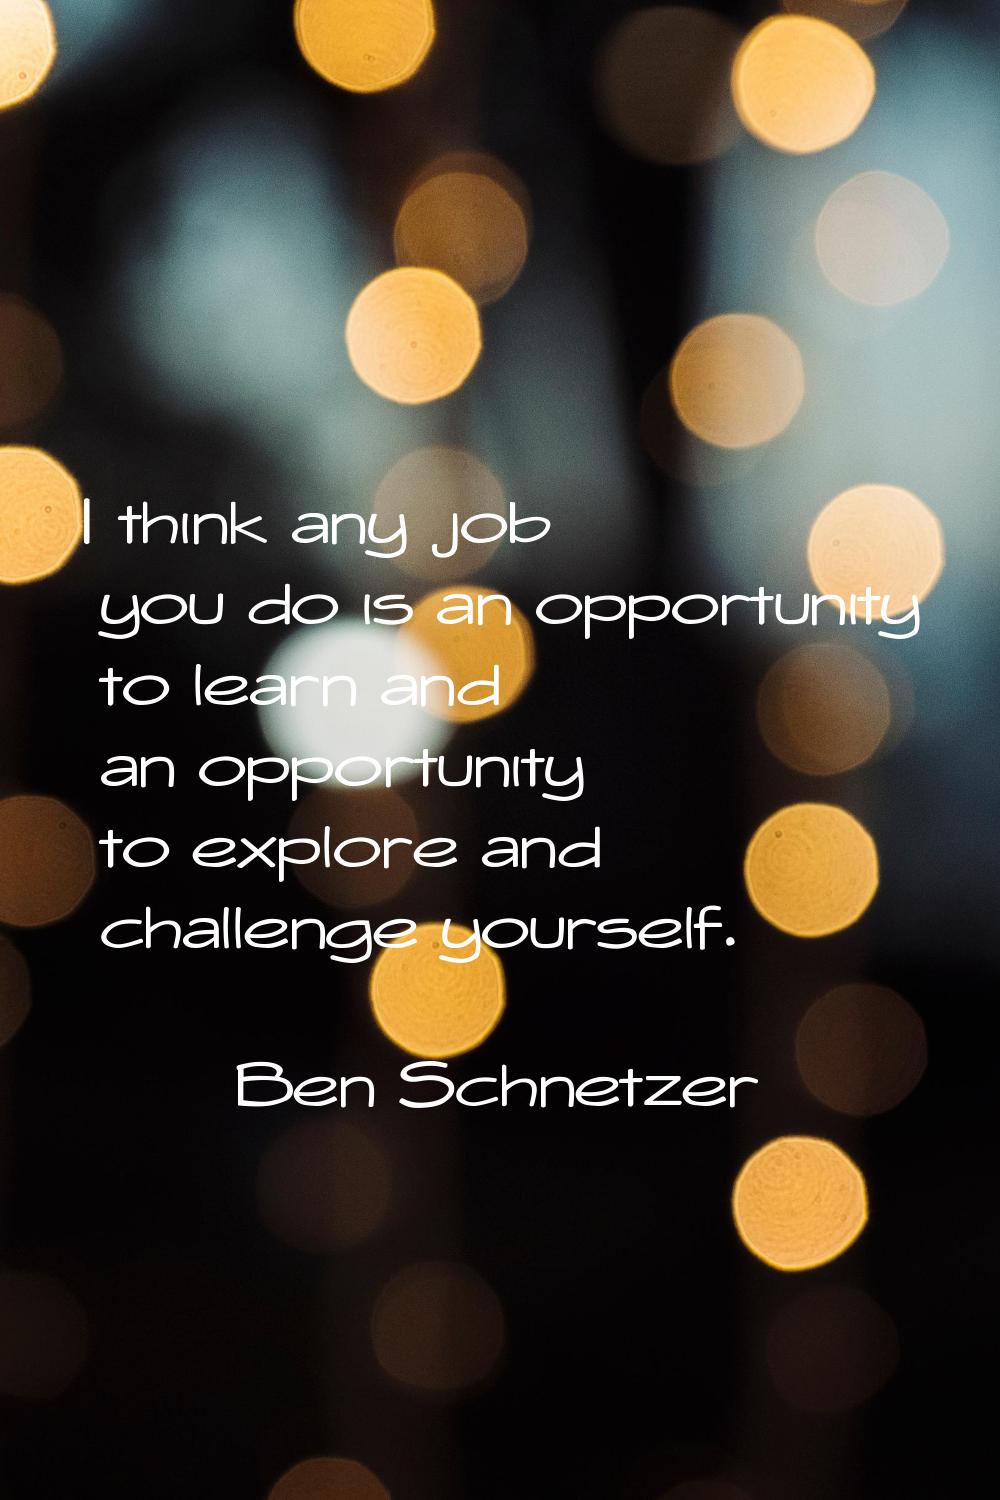 I think any job you do is an opportunity to learn and an opportunity to explore and challenge yours